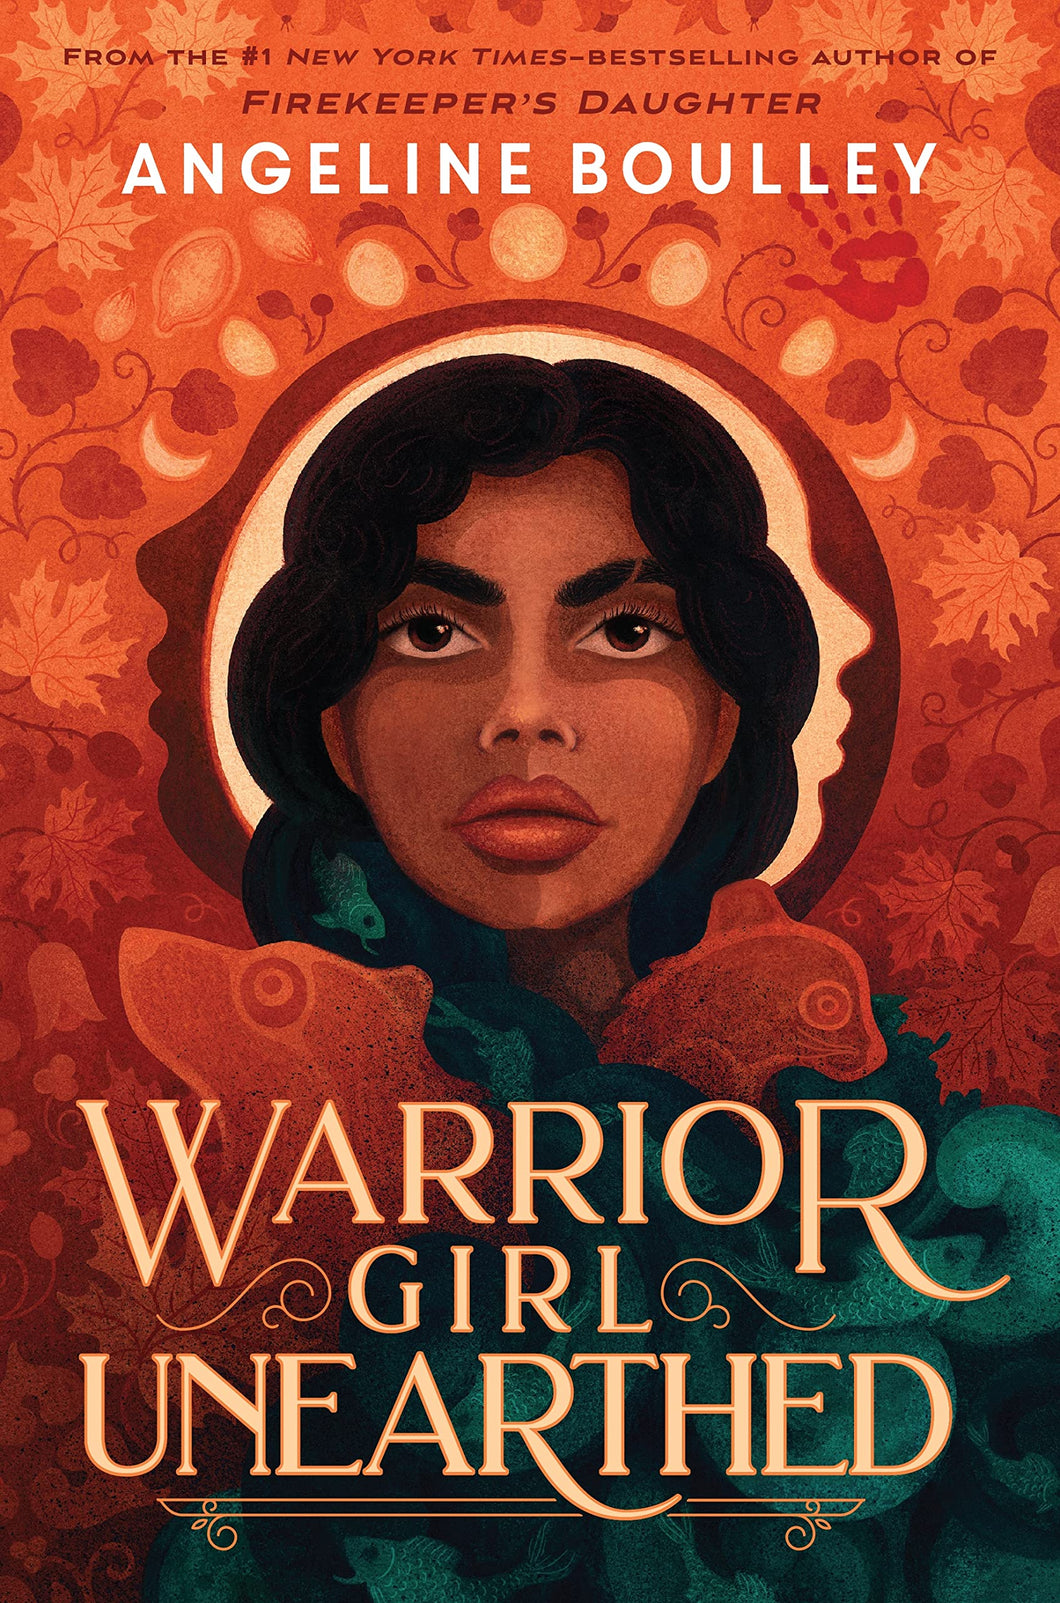 Warrior Girl Unearthed [Angeline Boulley]